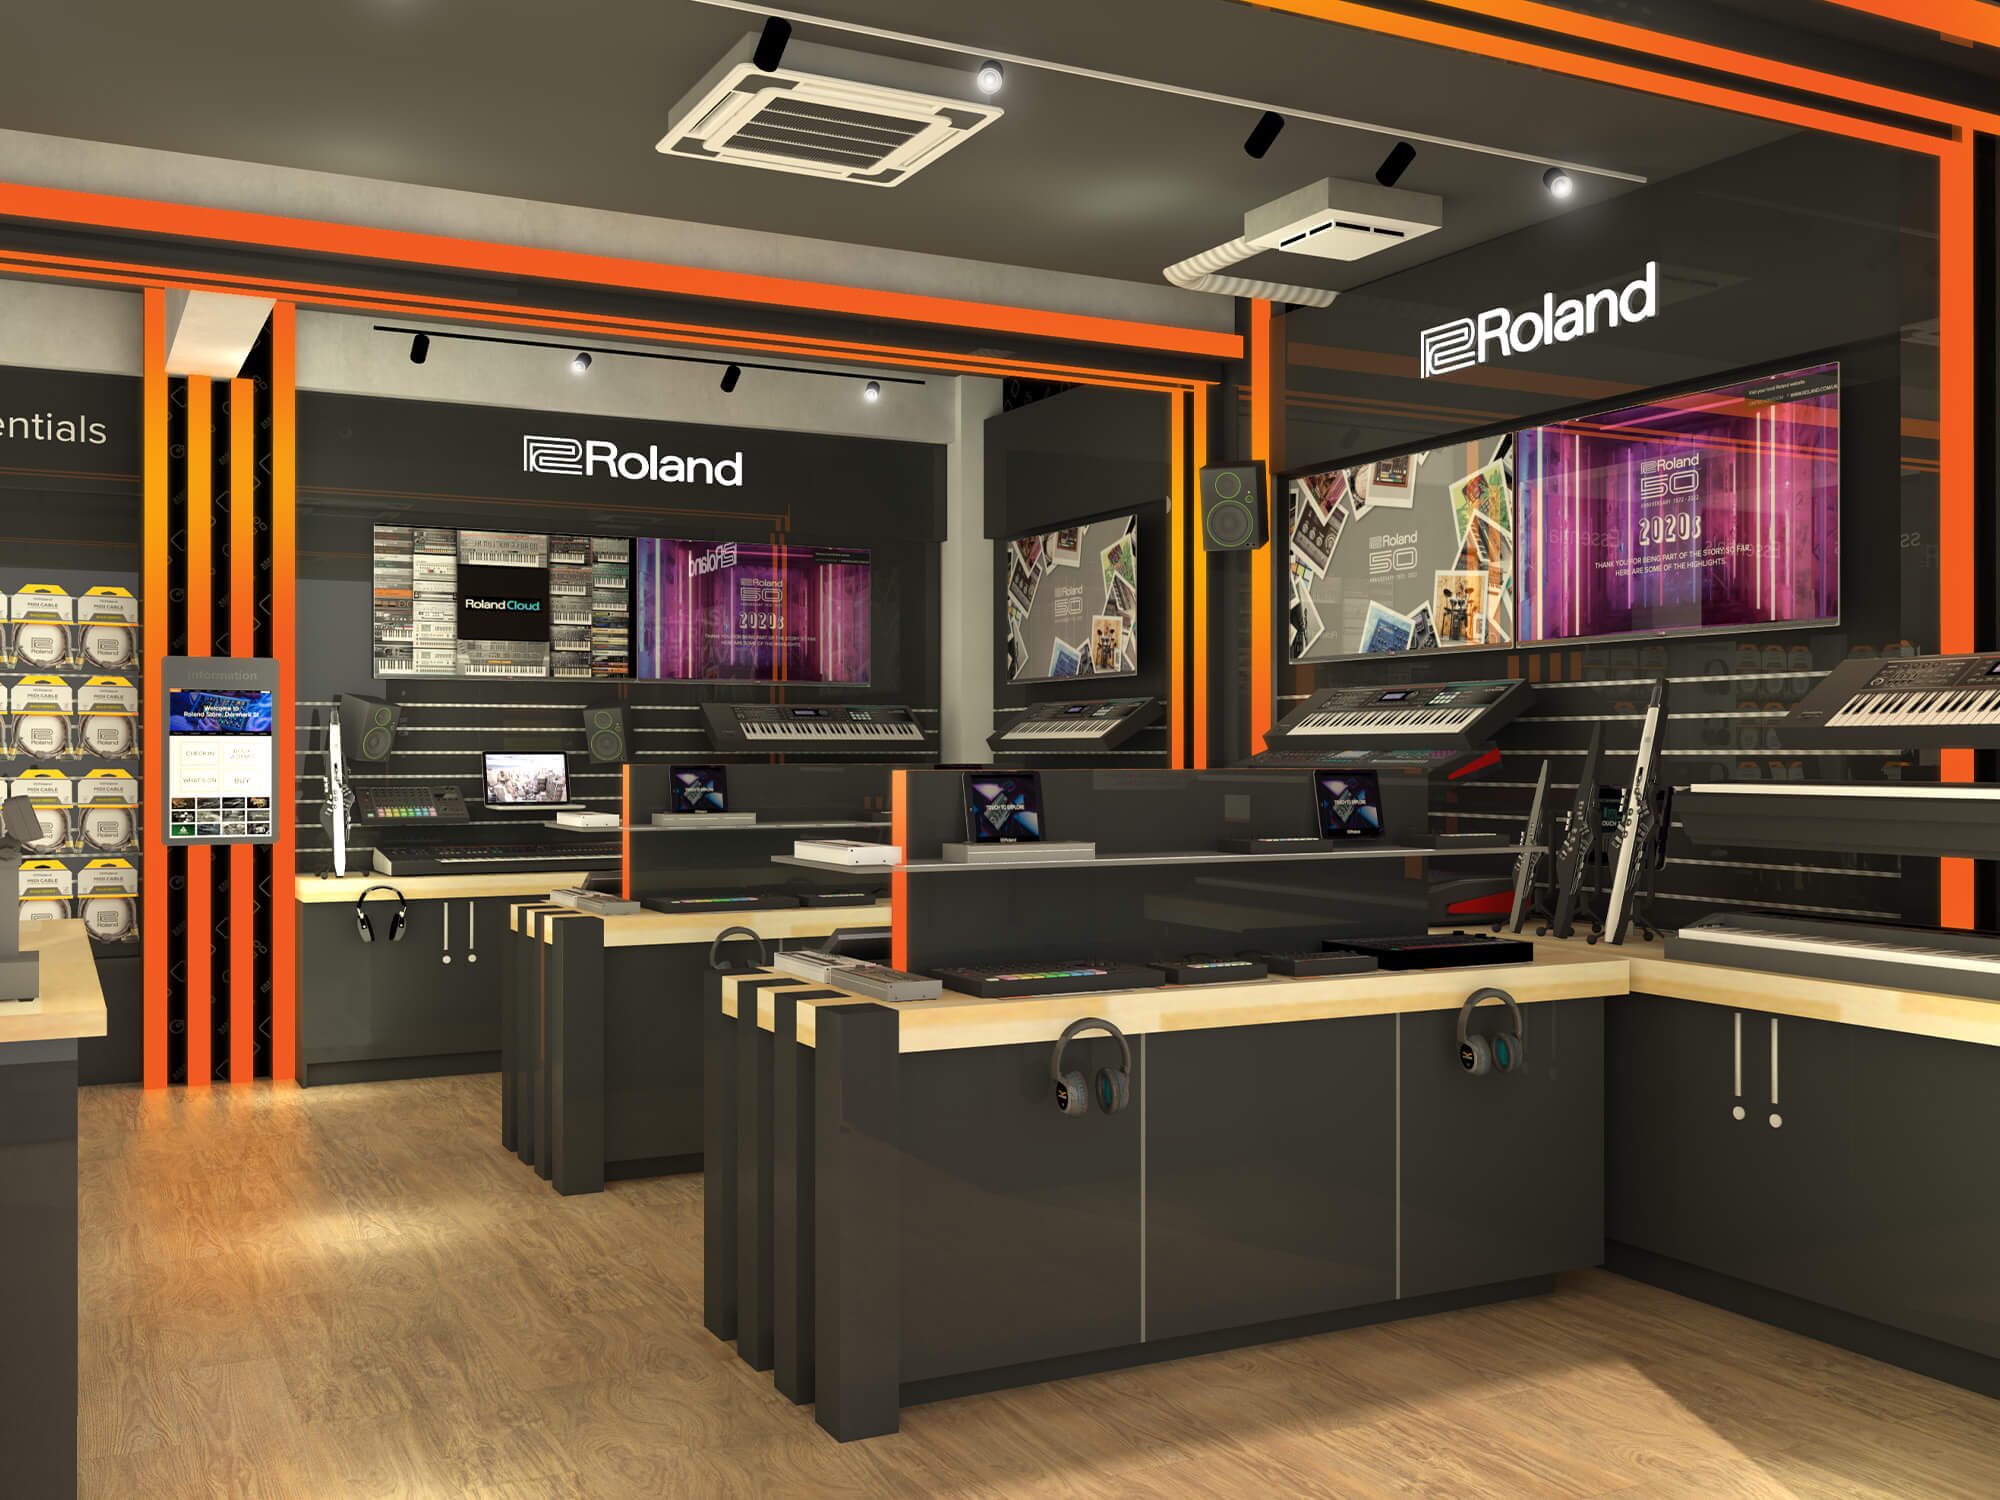 Rendered image of the Roland store, featuring a range of keyboards.